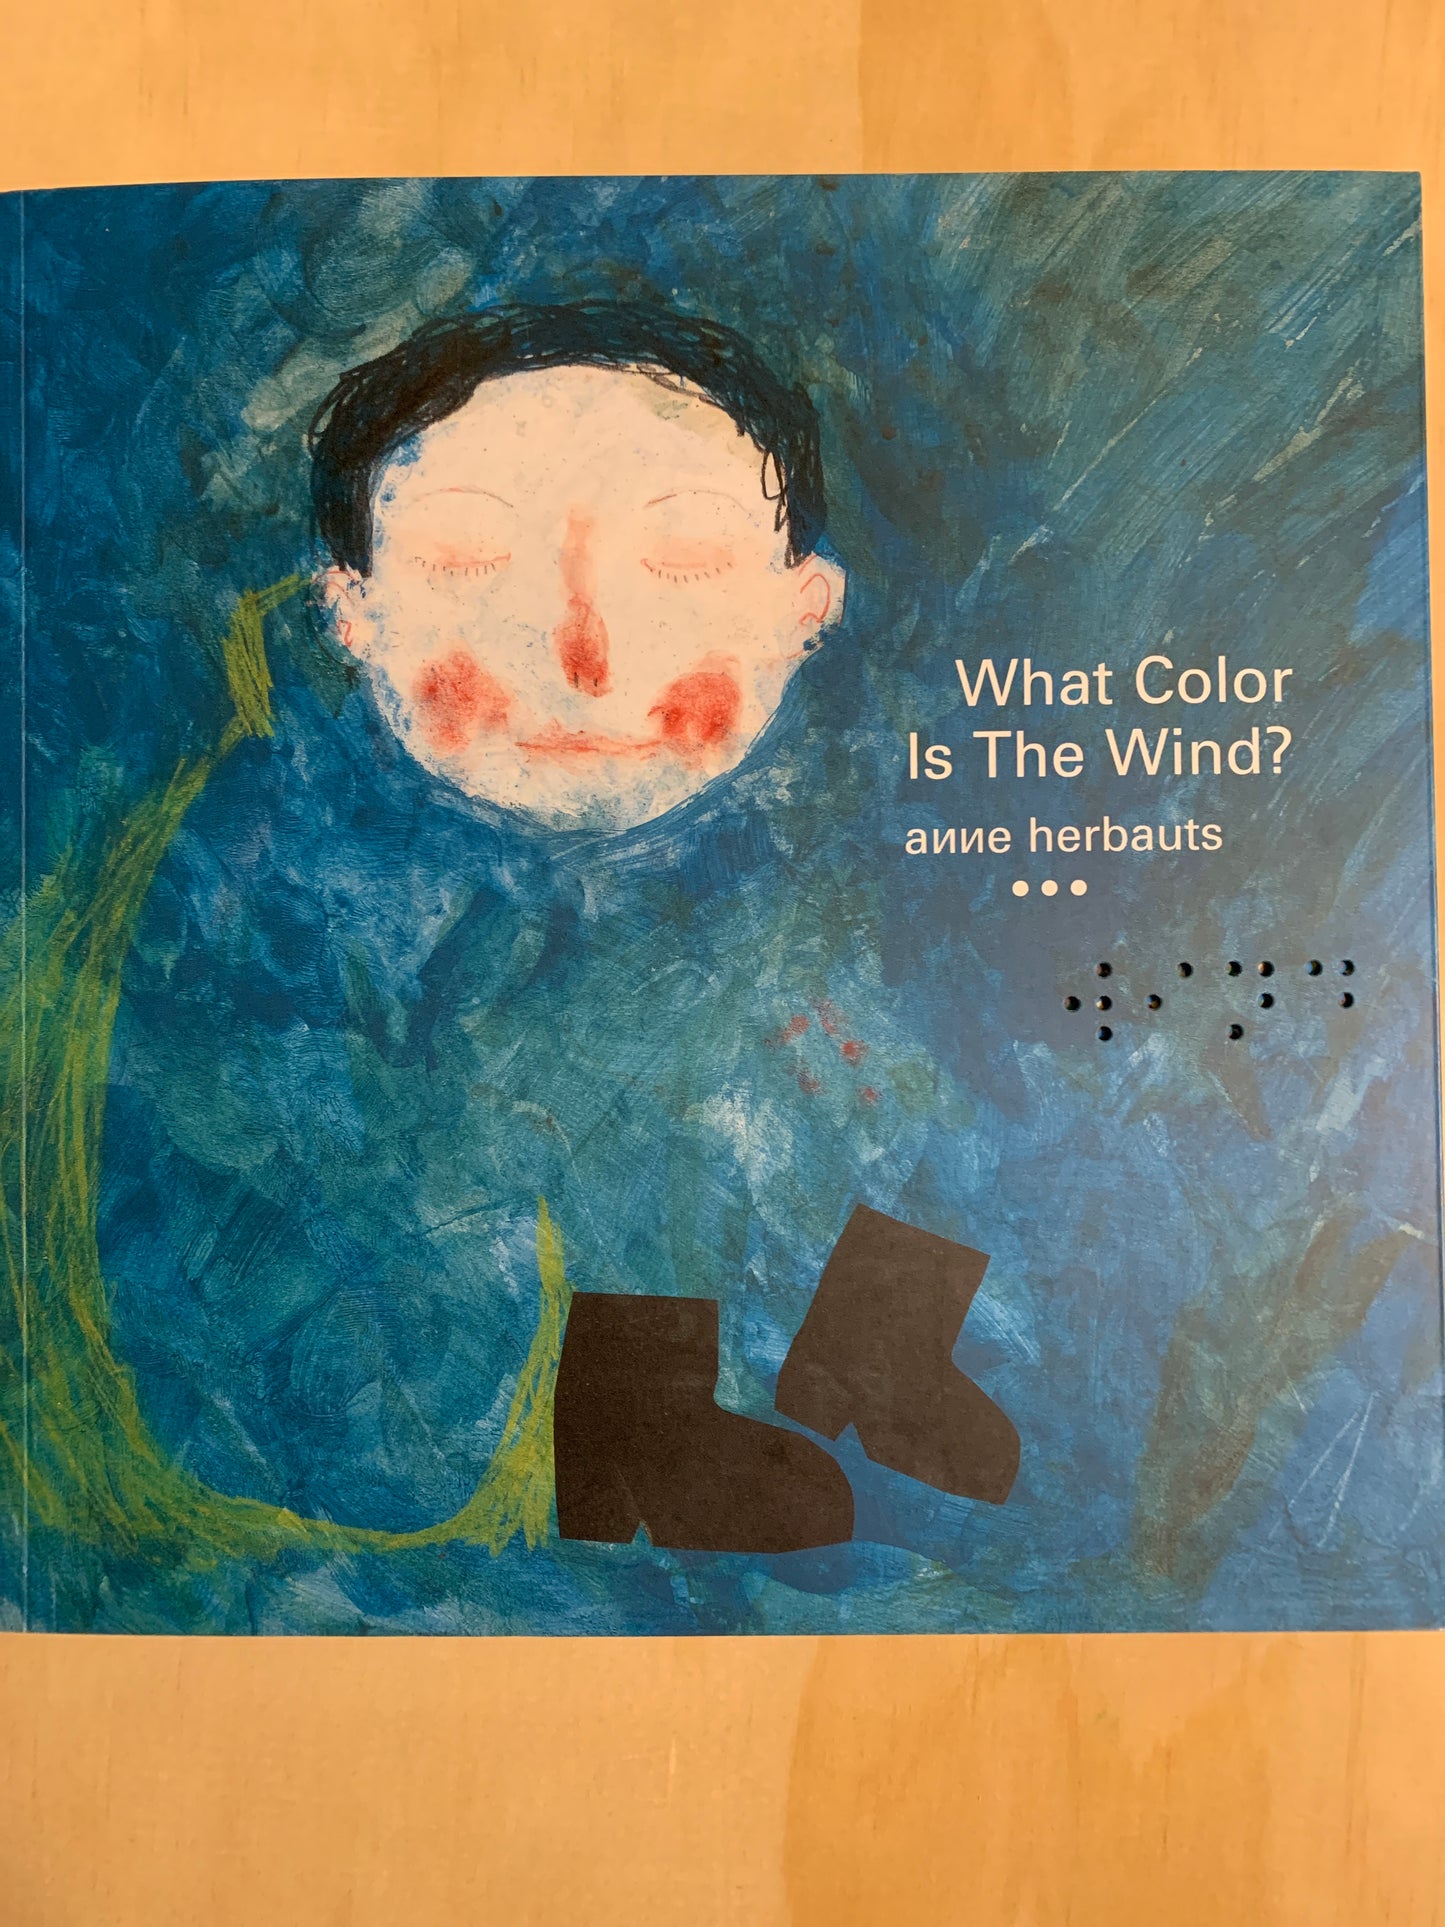 What Color is the Wind?